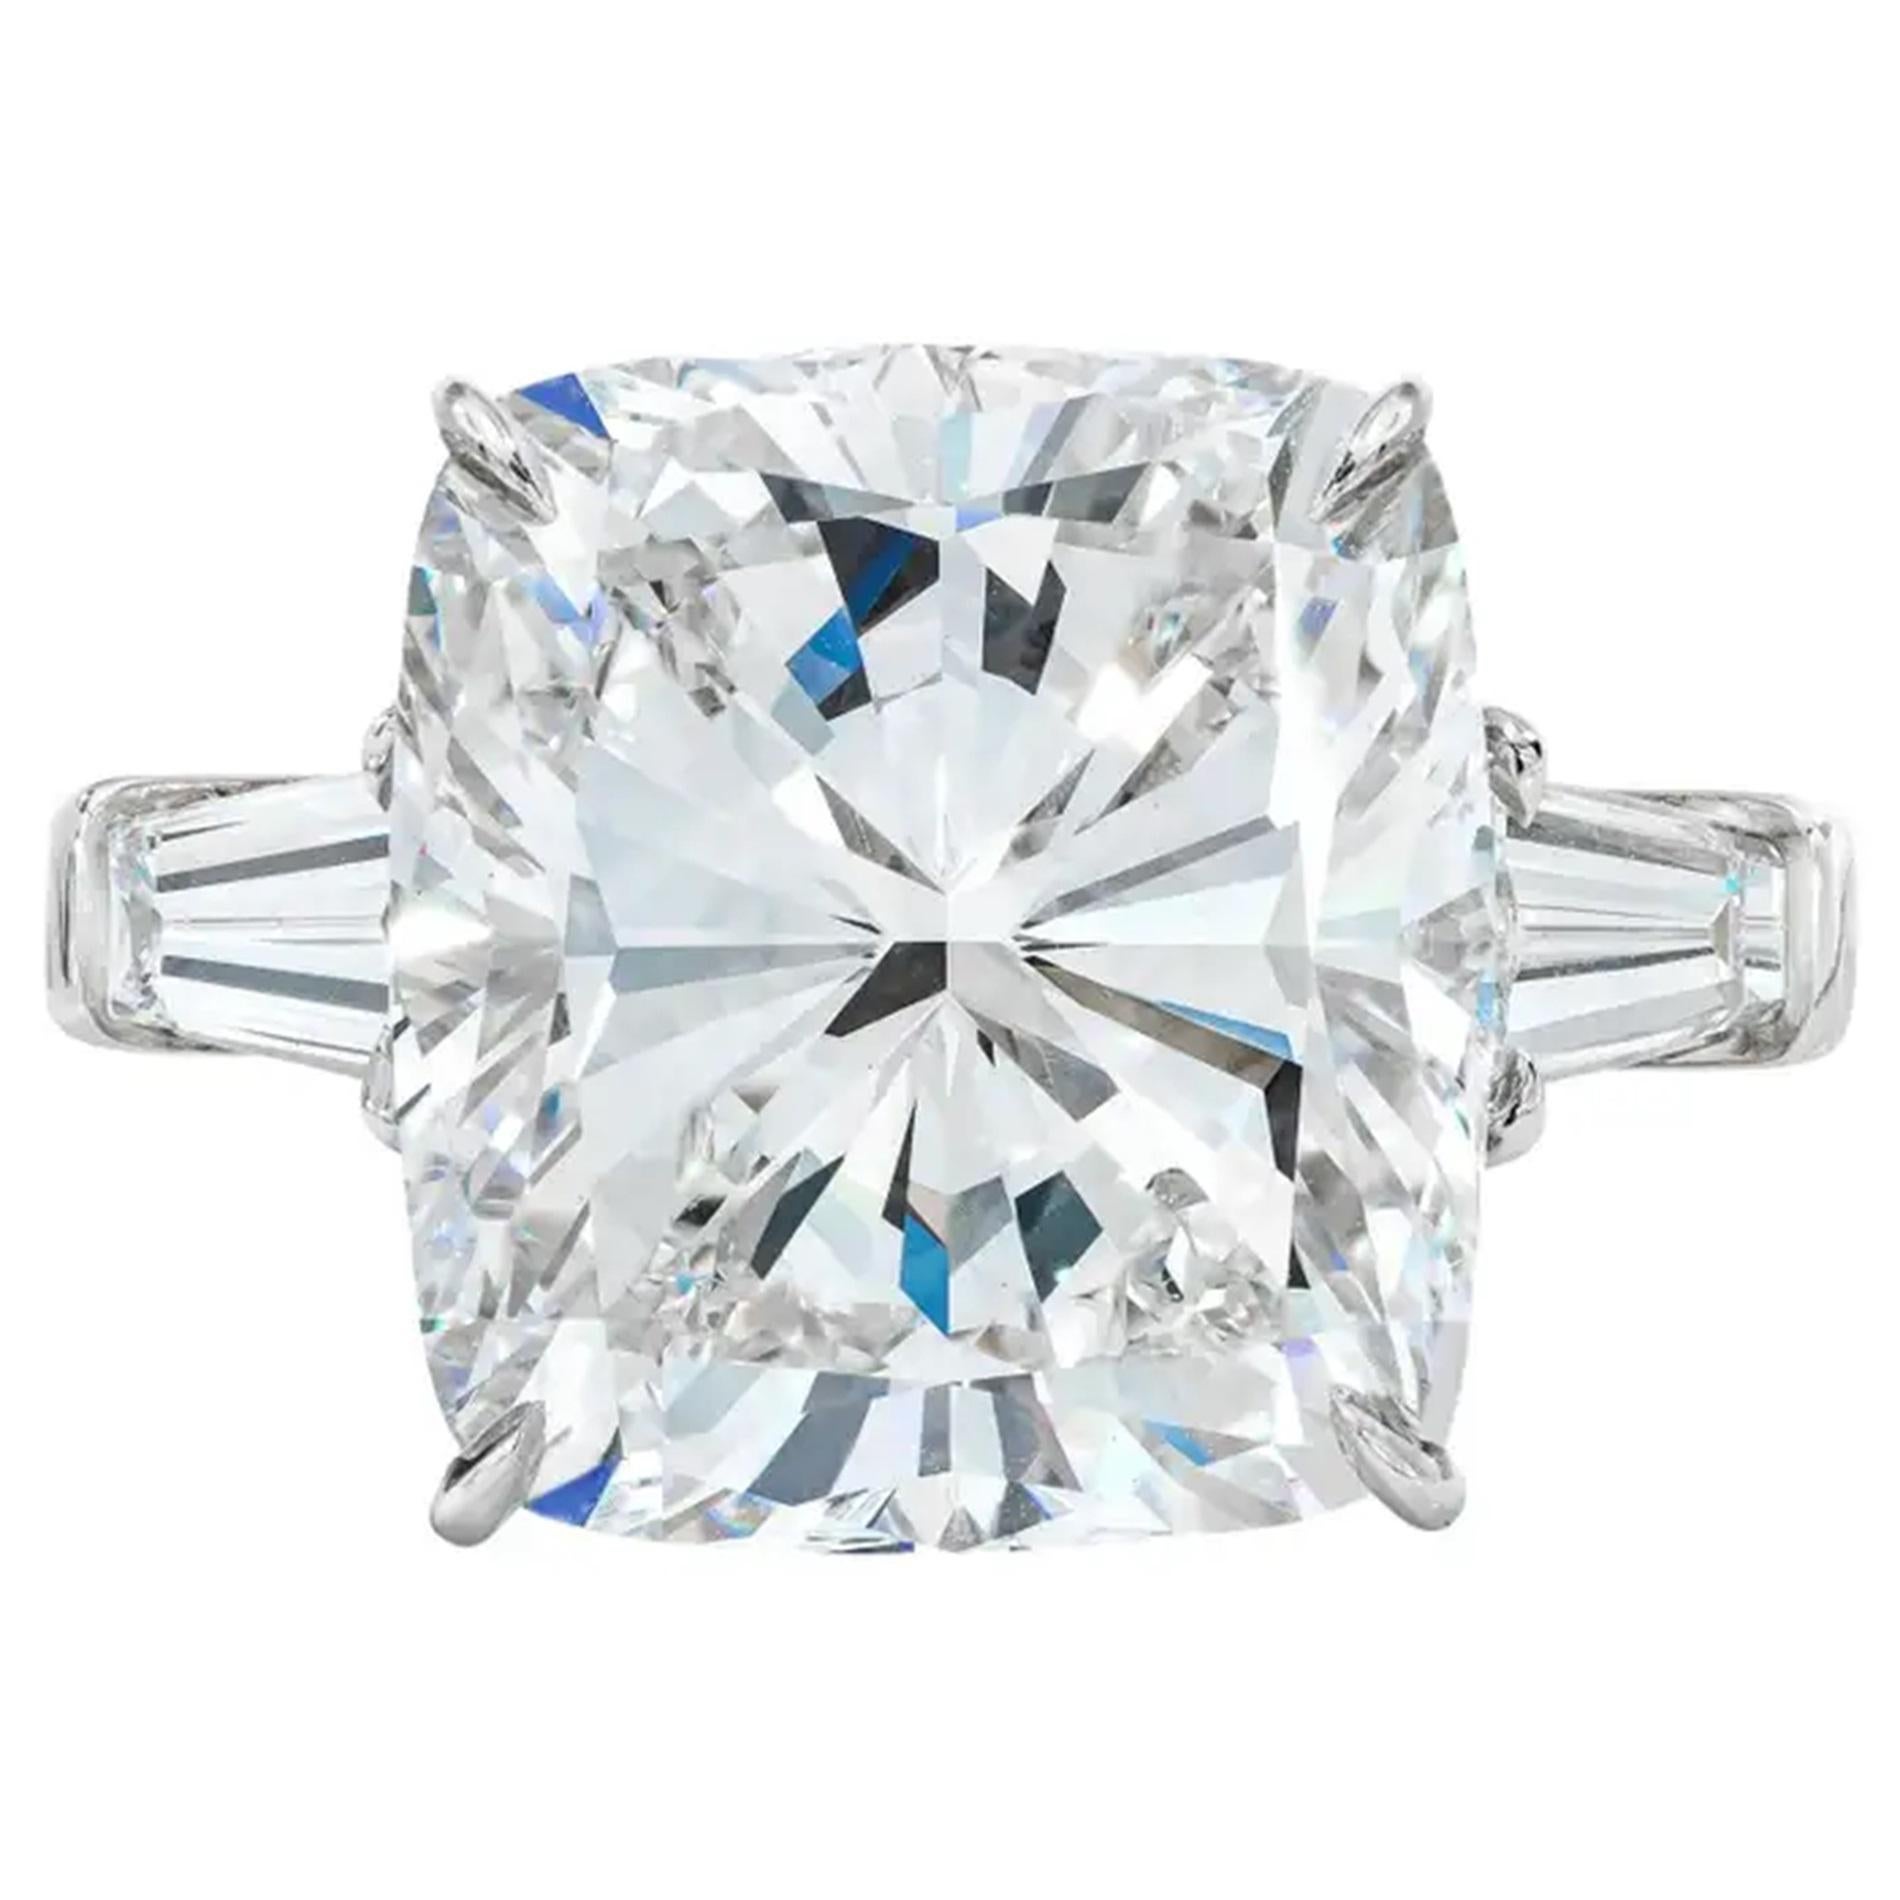 Introducing the exceptional GIA Certified 5.02 Carat Cushion Cut Diamond Ring, enhanced by tapered baguette diamonds. This exquisite ring features a captivating cushion-cut diamond, certified by the renowned Gemological Institute of America (GIA)